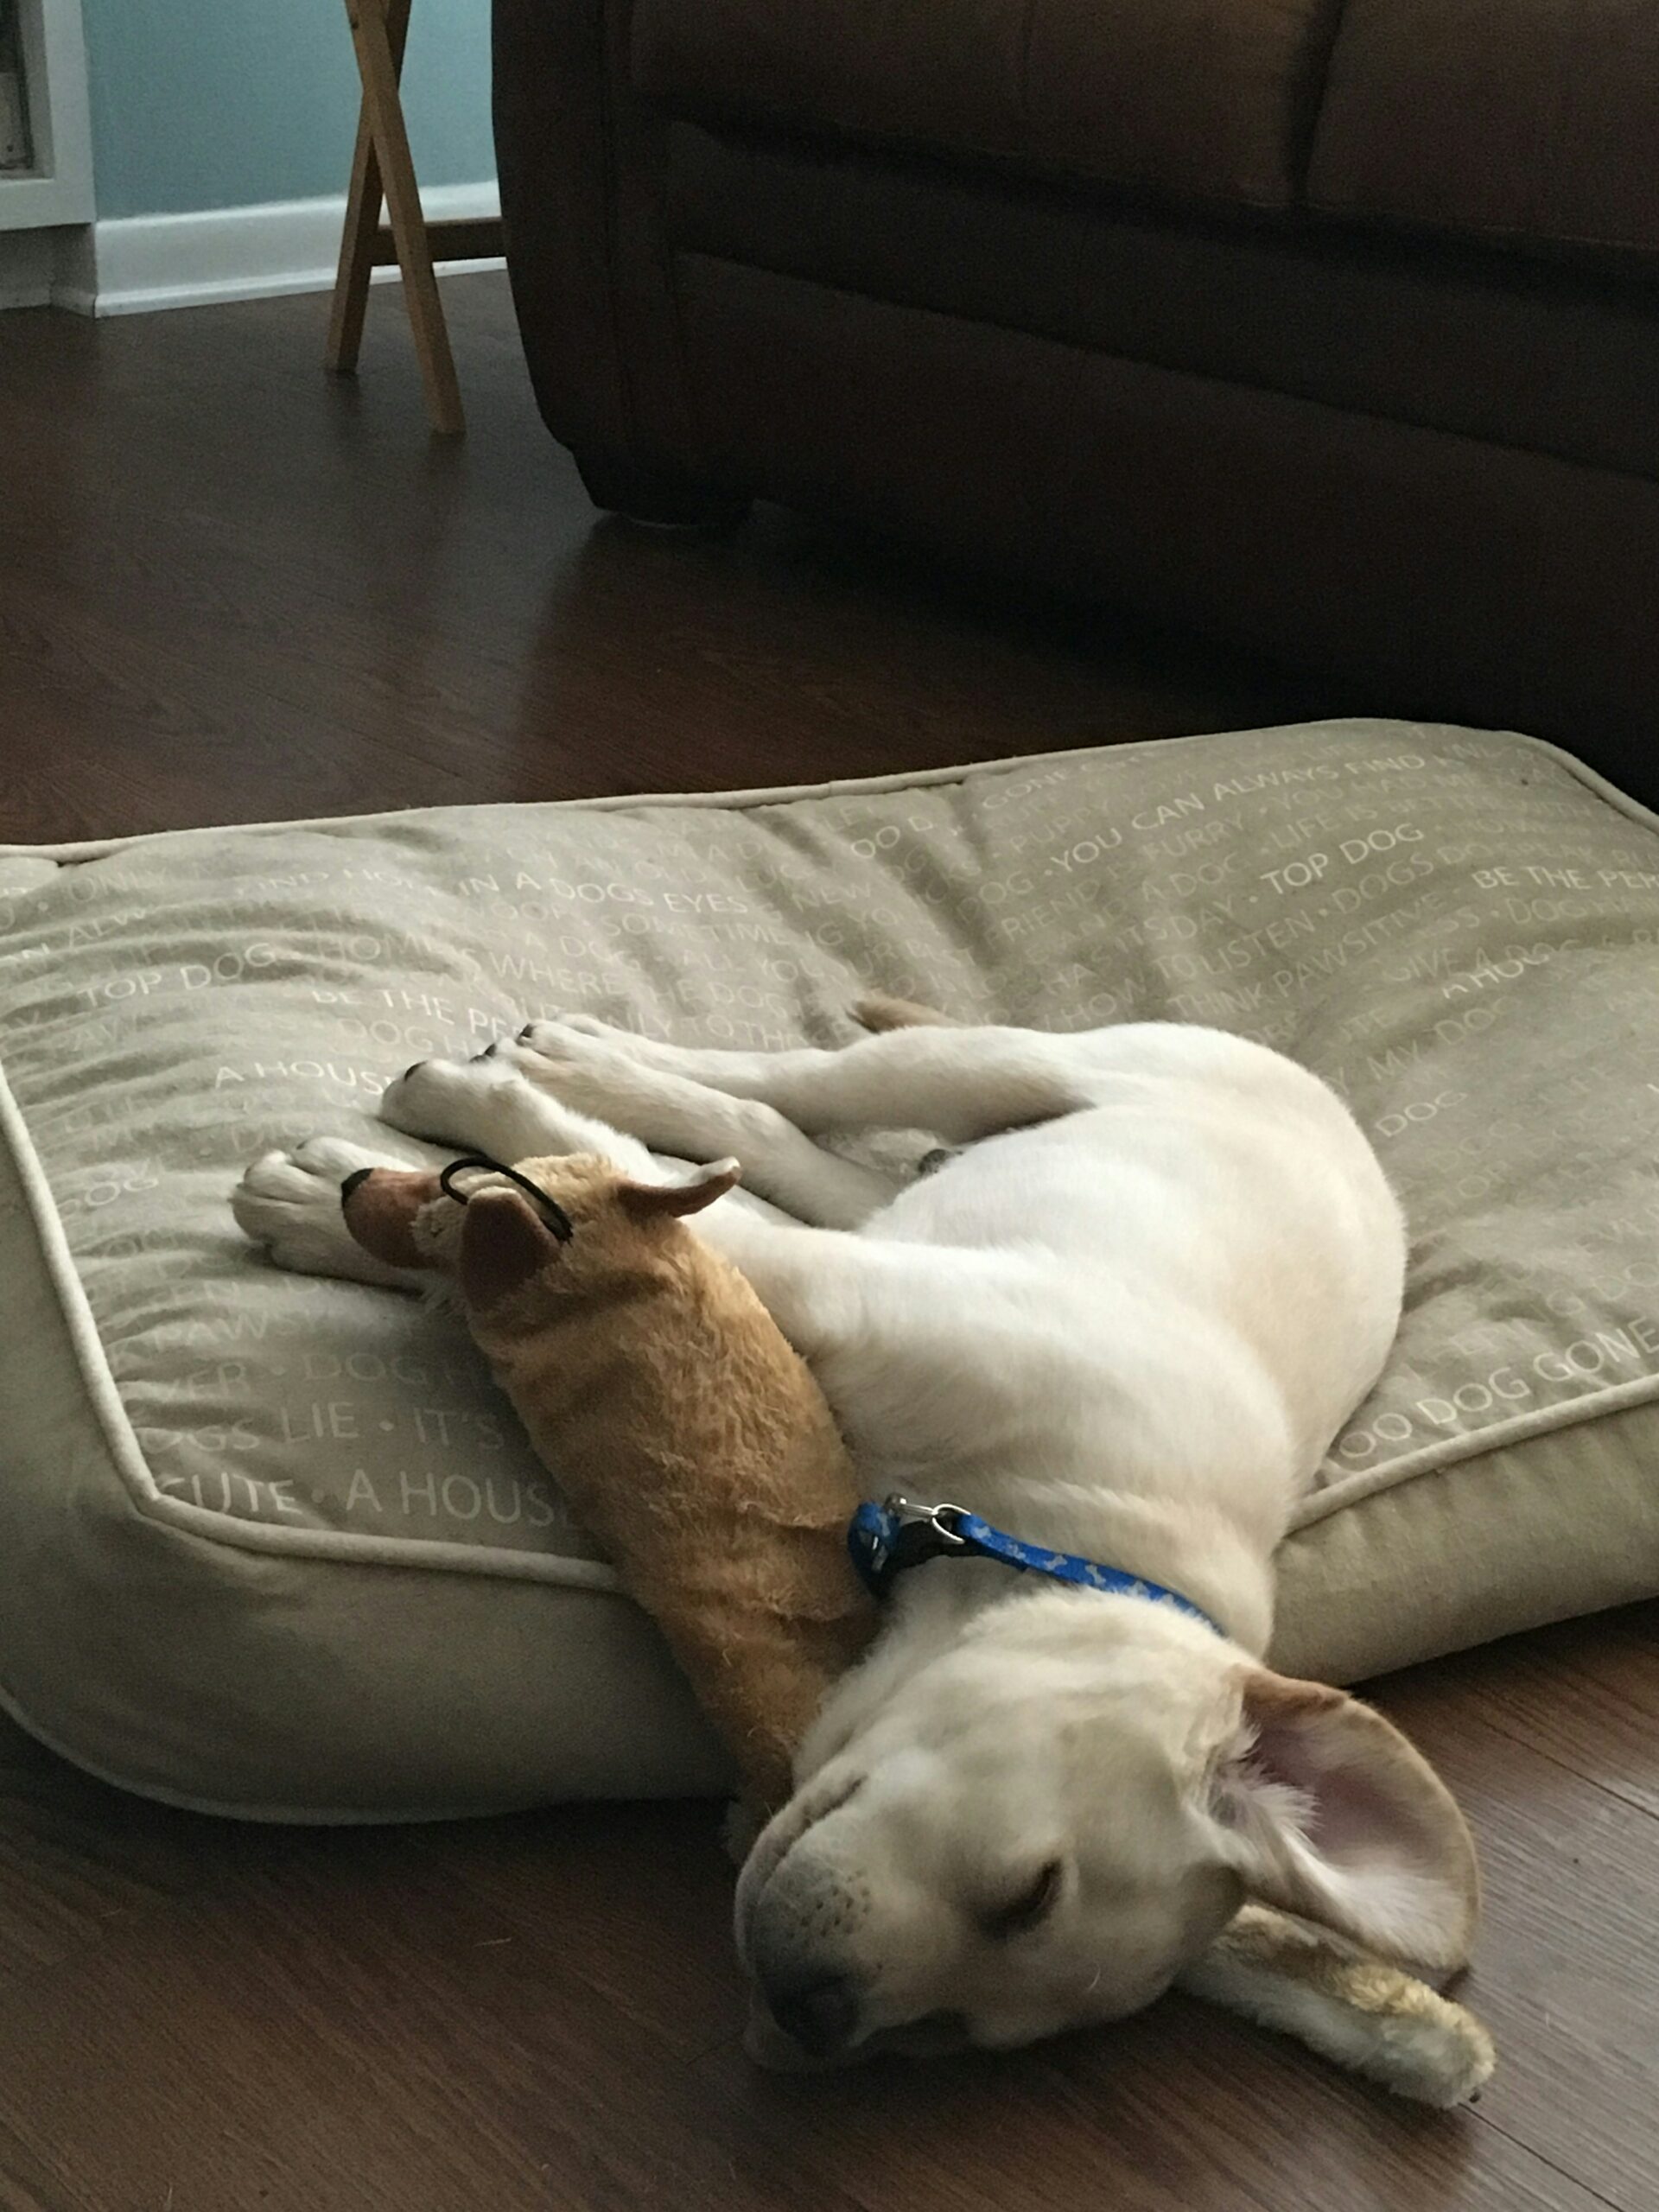 Decoding Your Dogs Sleeping Habits: What Their Positions Reveal